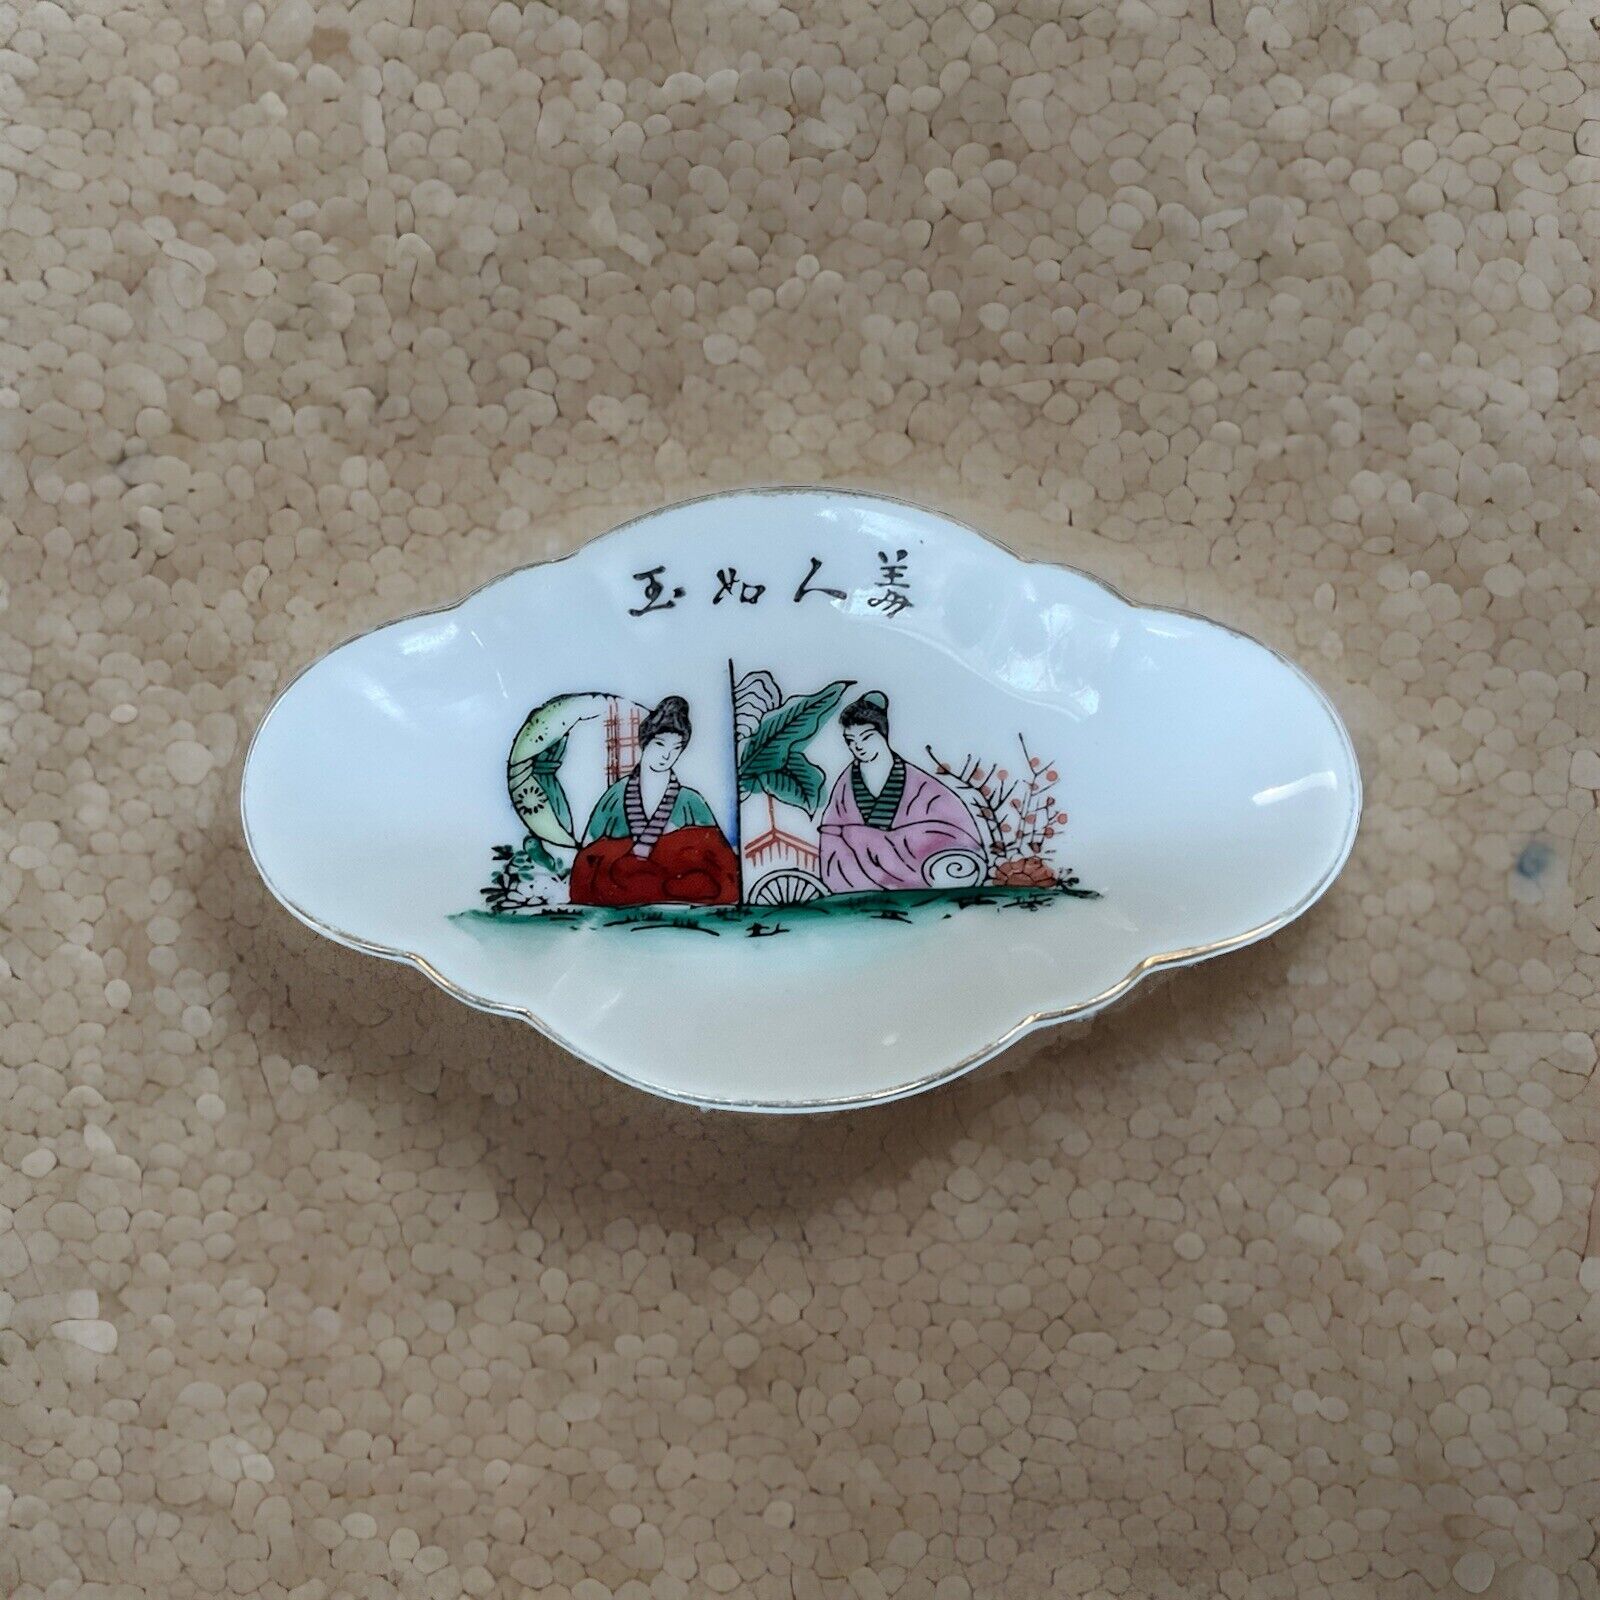 Colorful hand-painted porcelain plates depicting ancient Chinese beauties